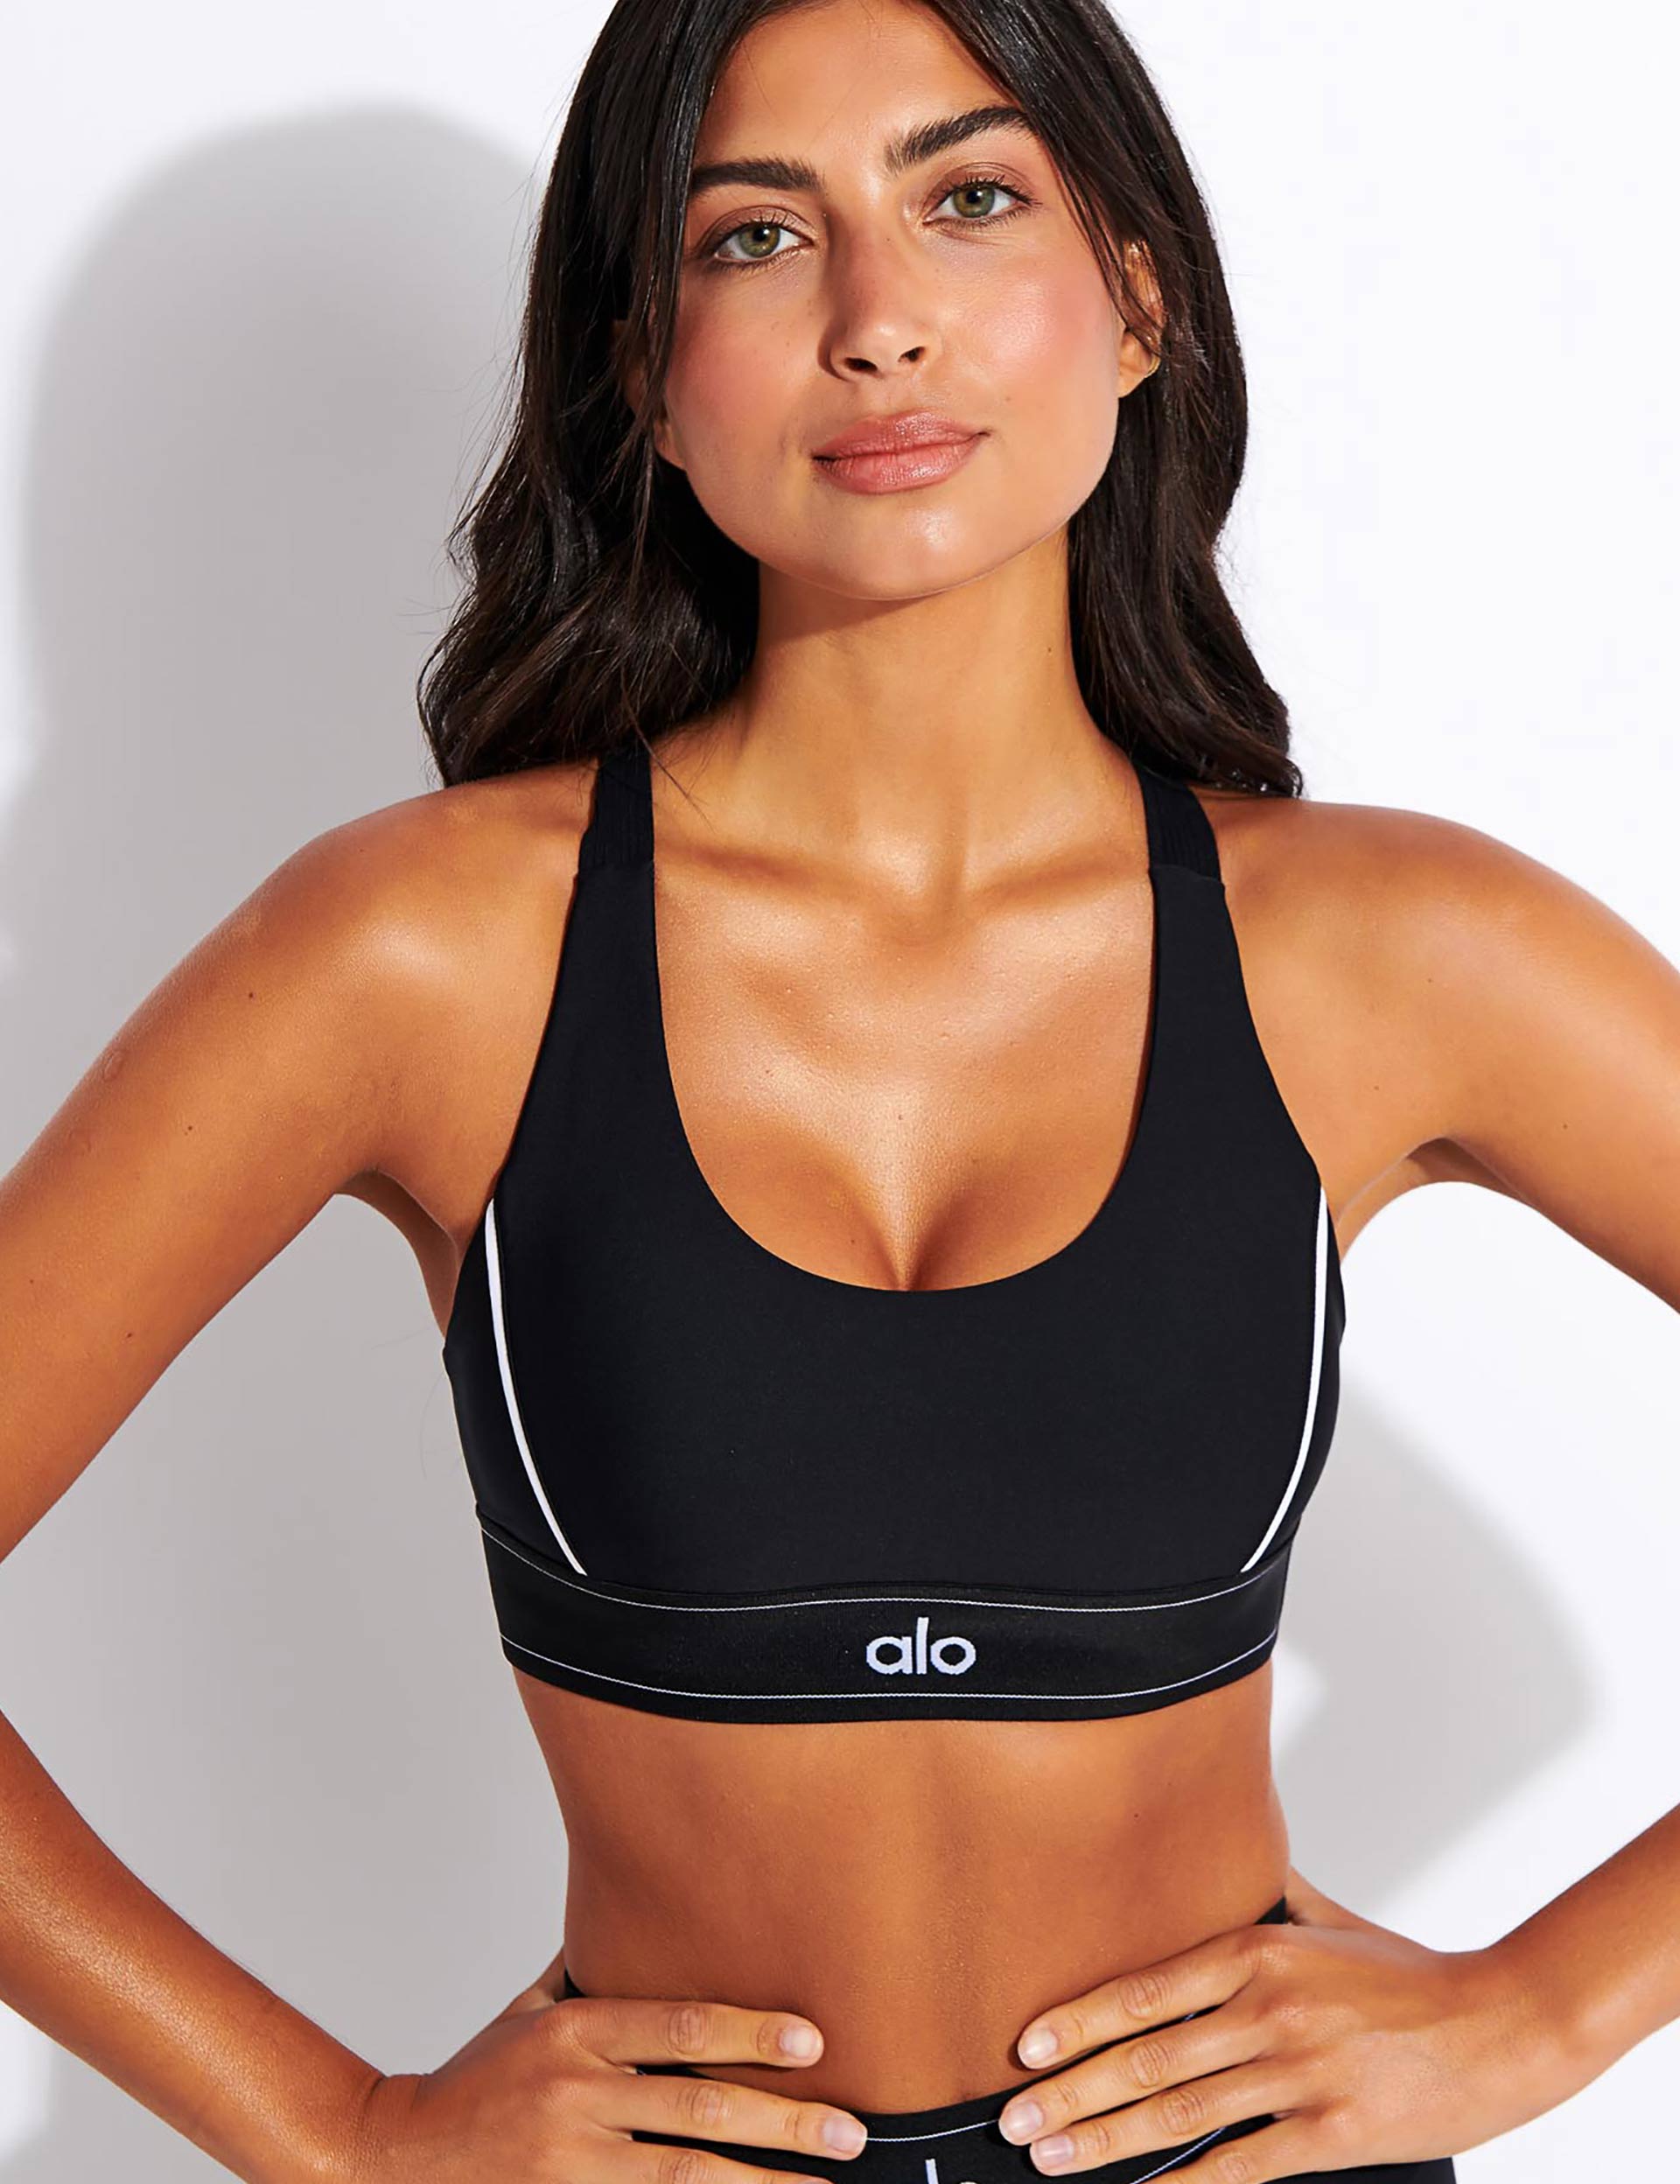 The Best Sports Bras From Alo